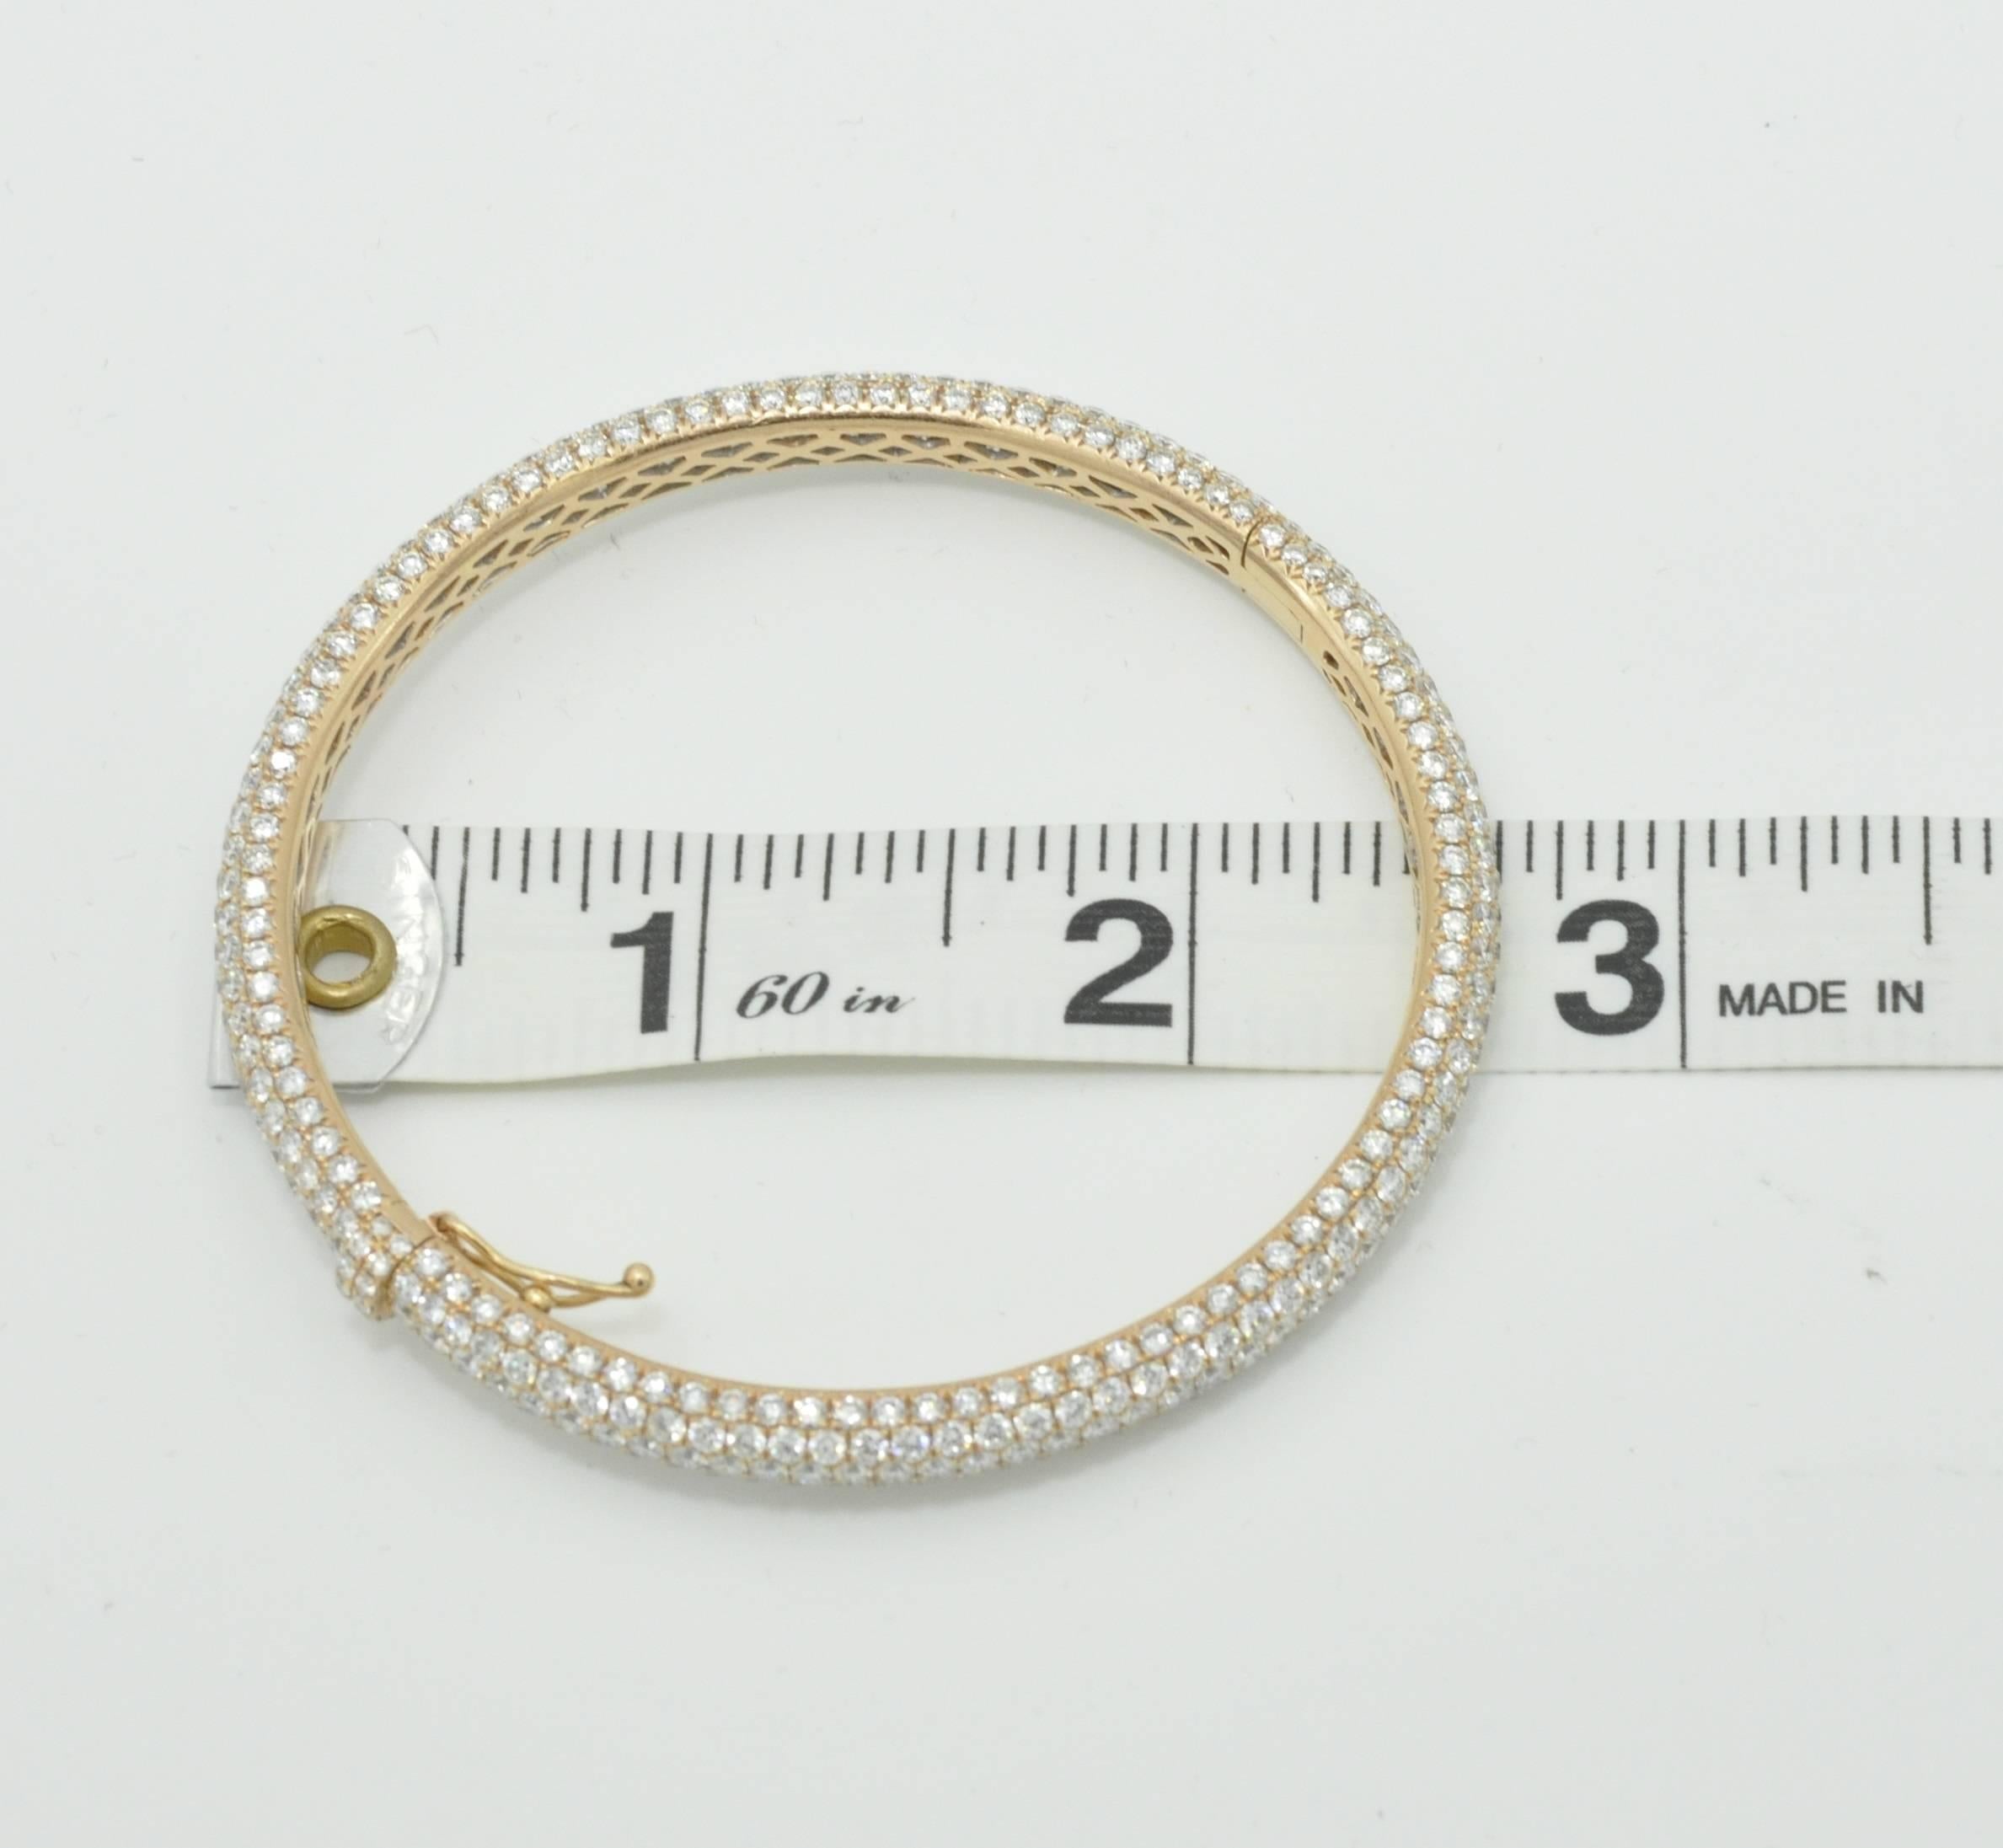 18K Rose Gold and Pave Diamond Bangle Bracelet.  Fits a traditional 7 inch sized wrist.  This bracelet has 404 stones and is G-VS1 Color and Clarity.  Total of 12.5 carats of diamonds.  There is a inside fold over safety lock.  Pre-Owned. 